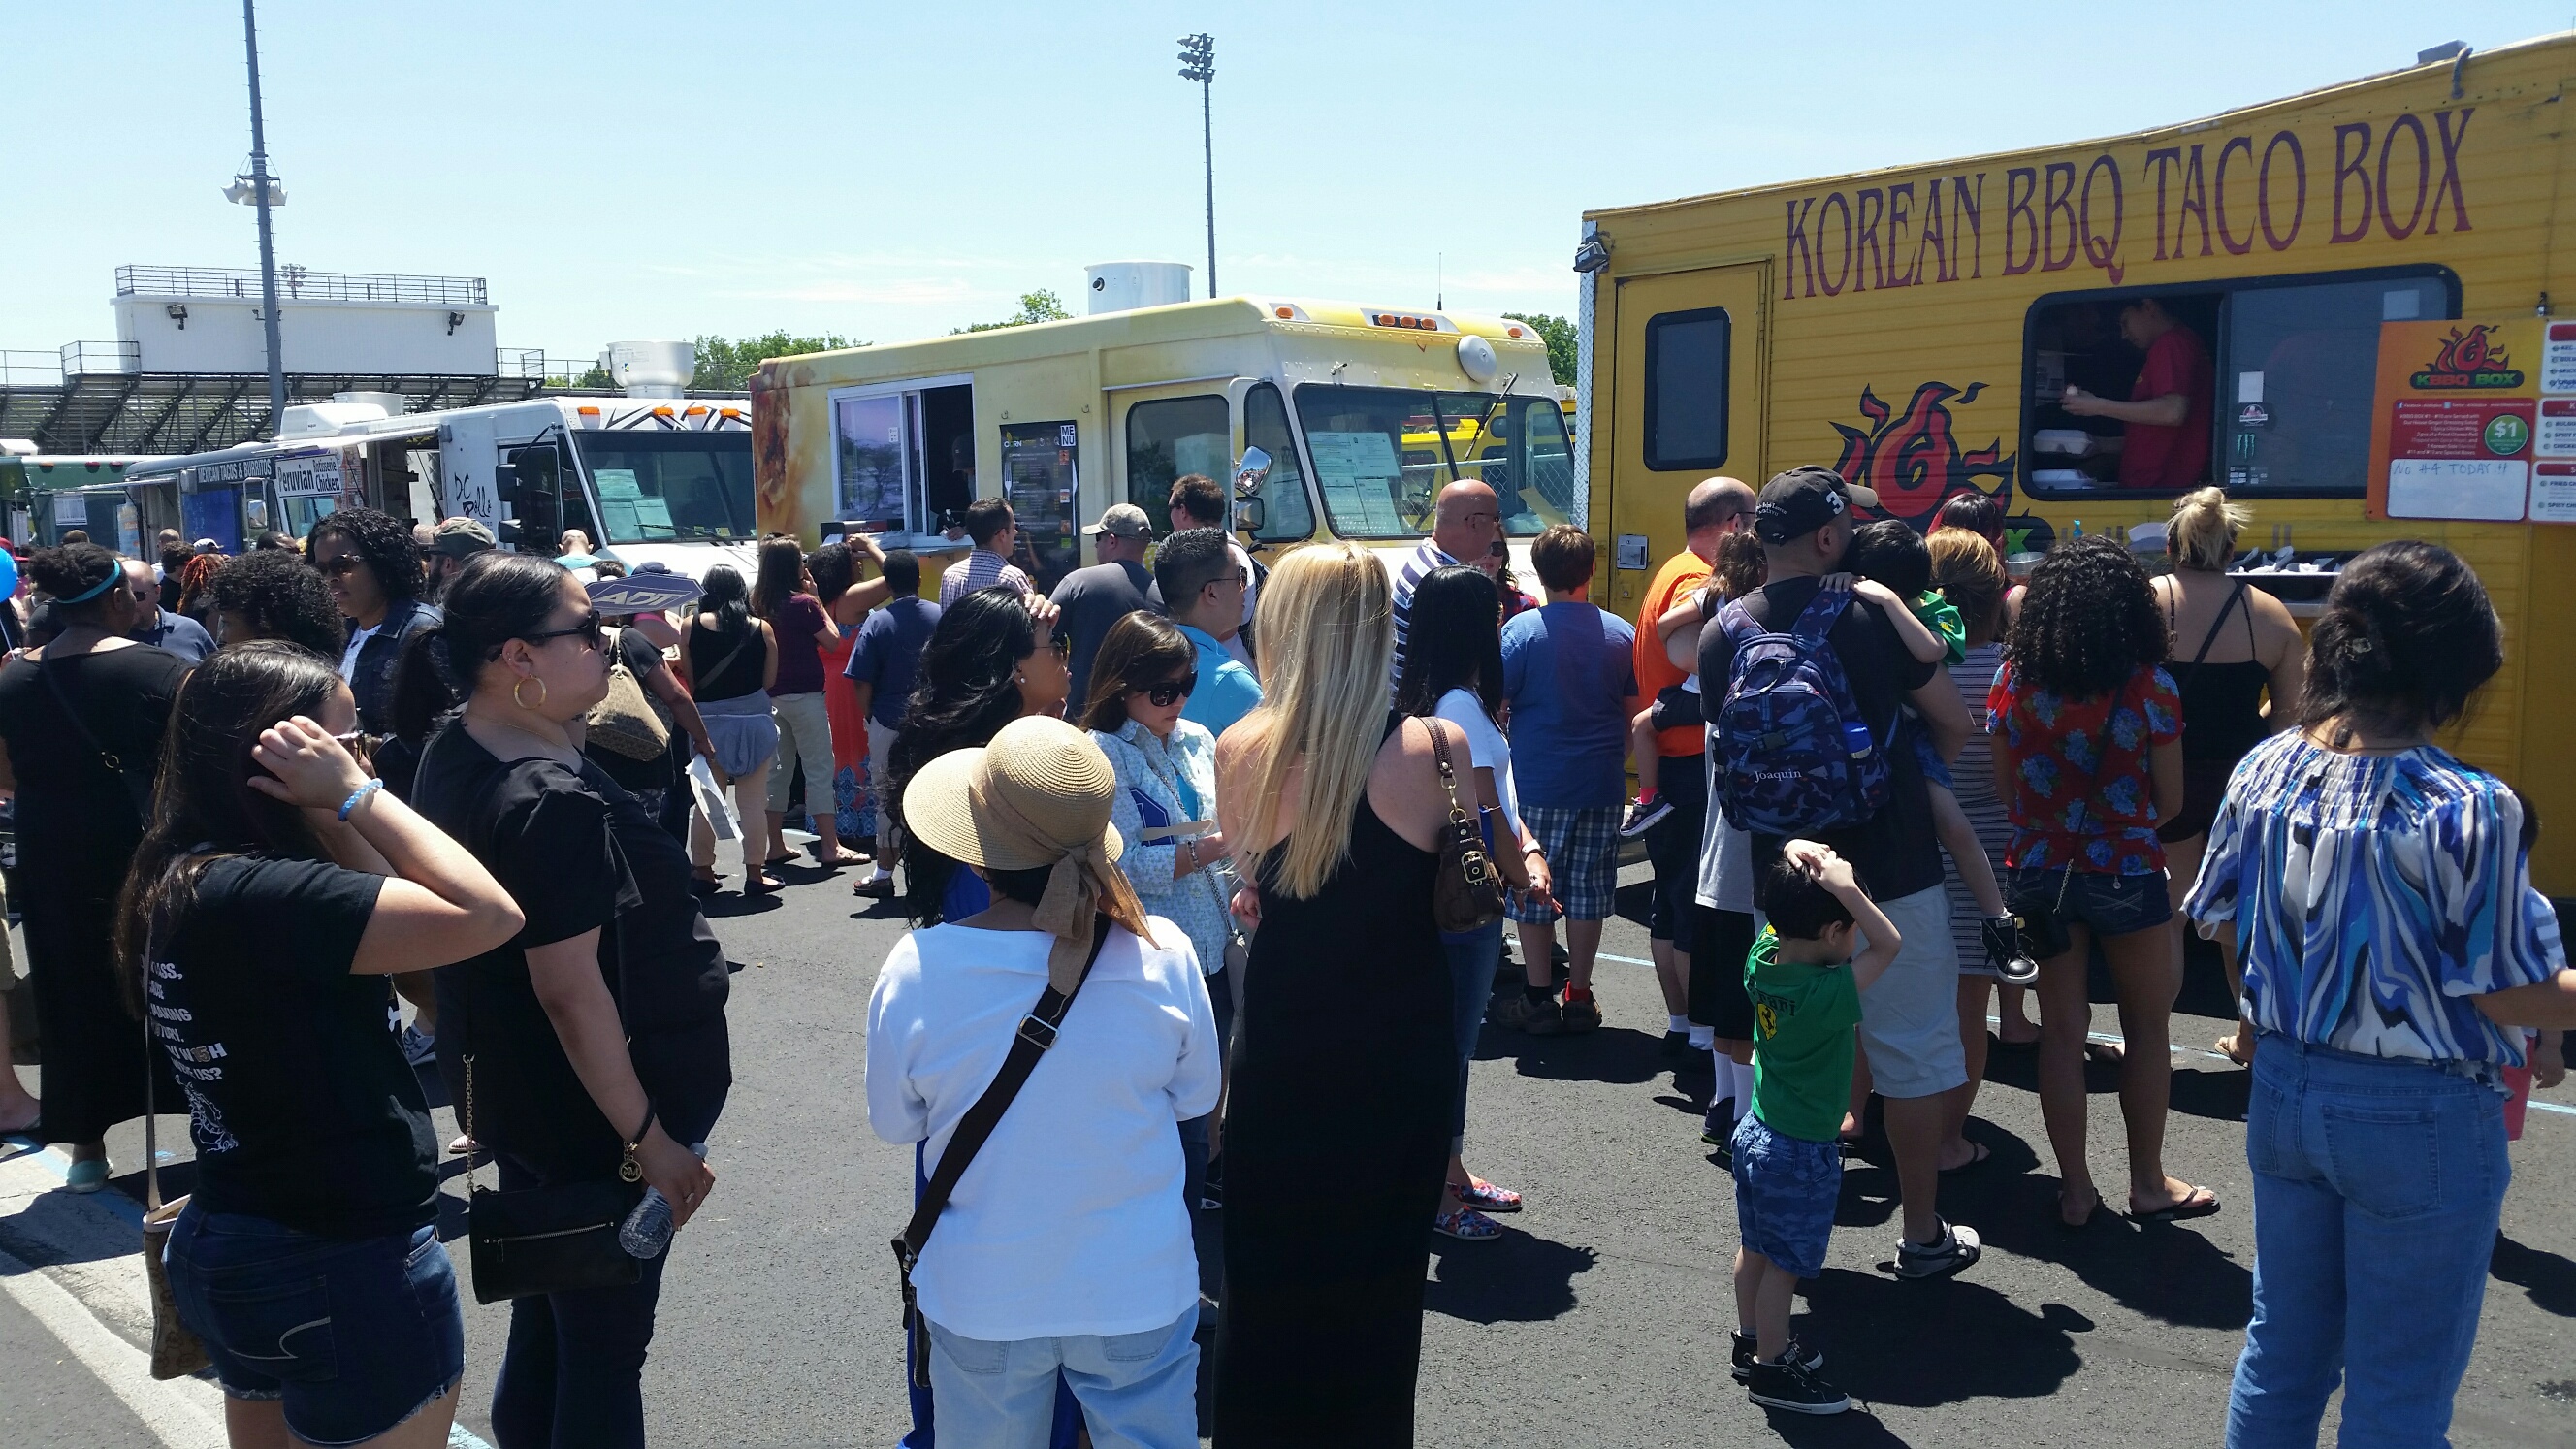 How food trucks at commuter lots could help with security